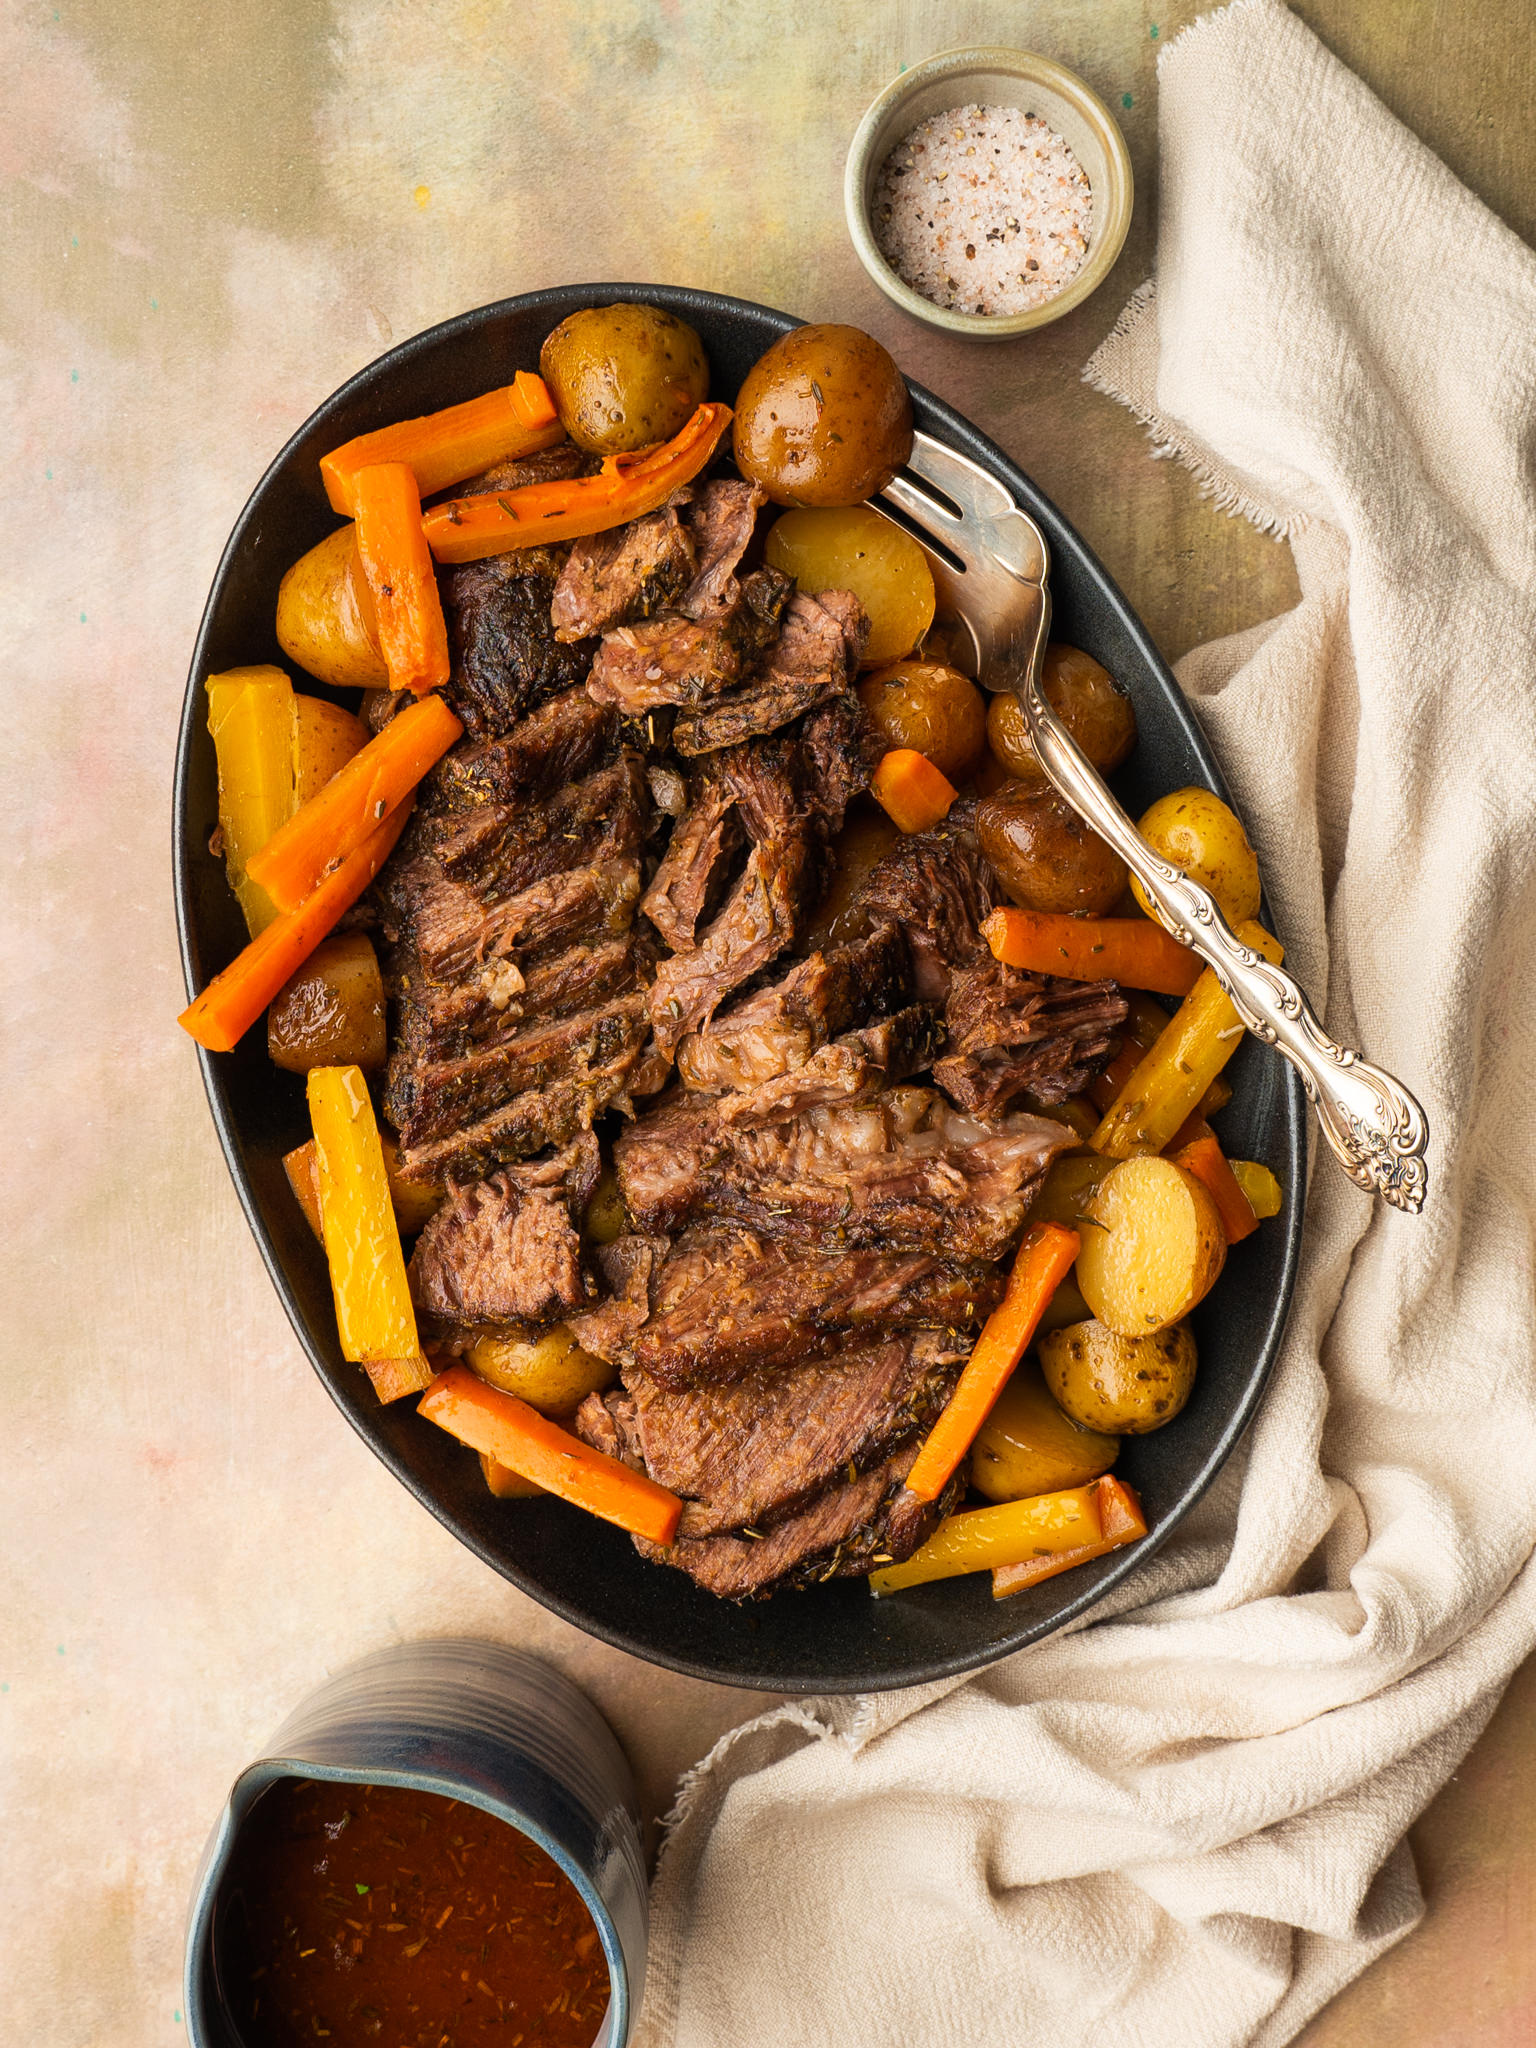 Tender oven baked chuck roast recipe served with au jus